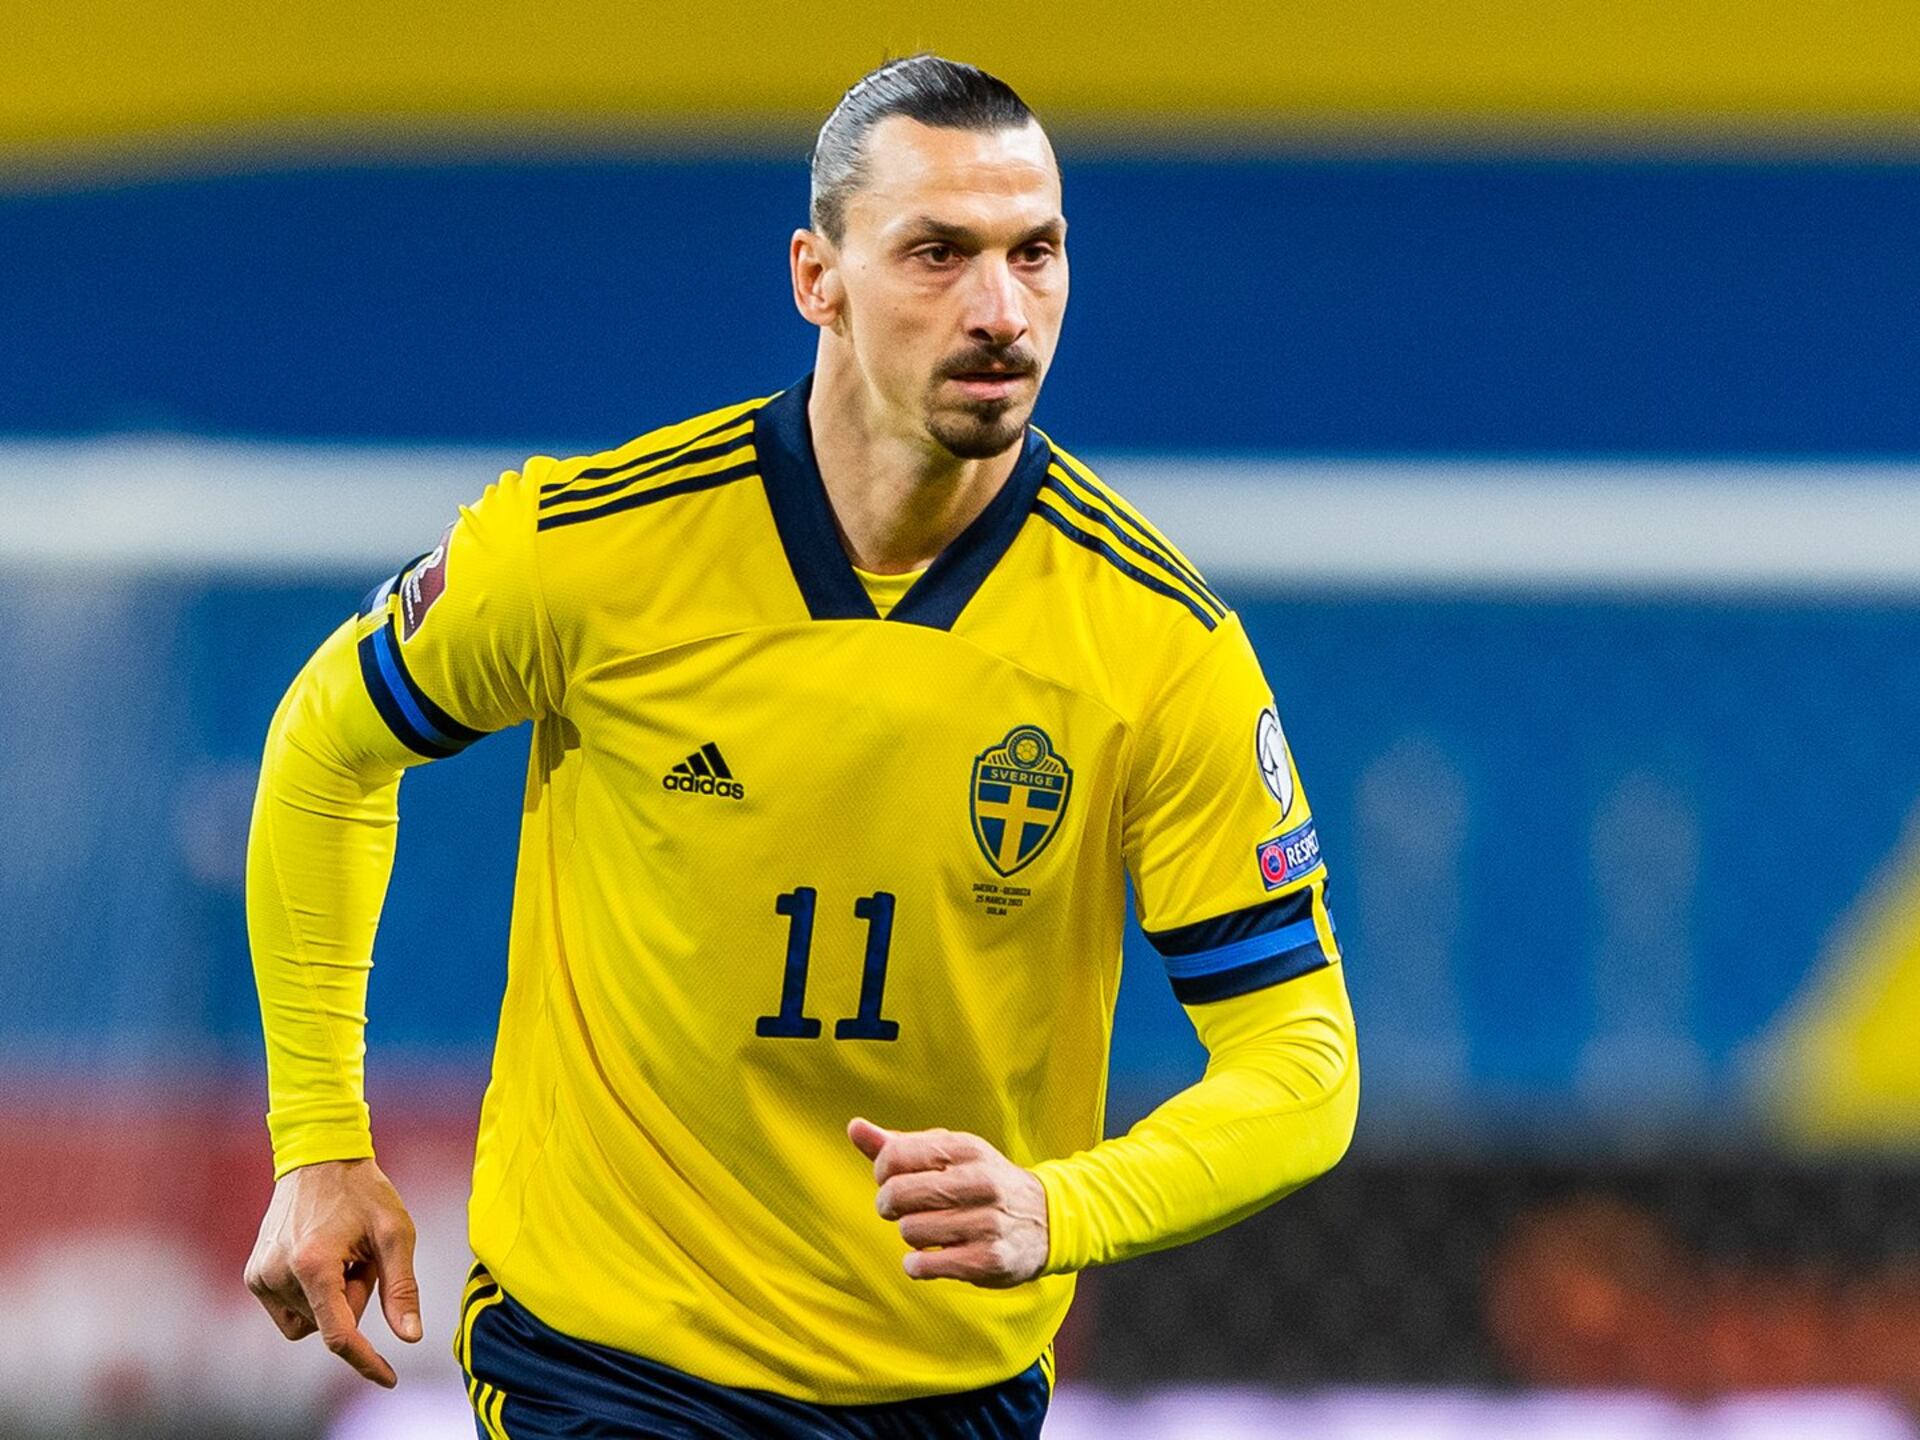 Zlatan Ibrahimovic and an announcement that surprised everyone